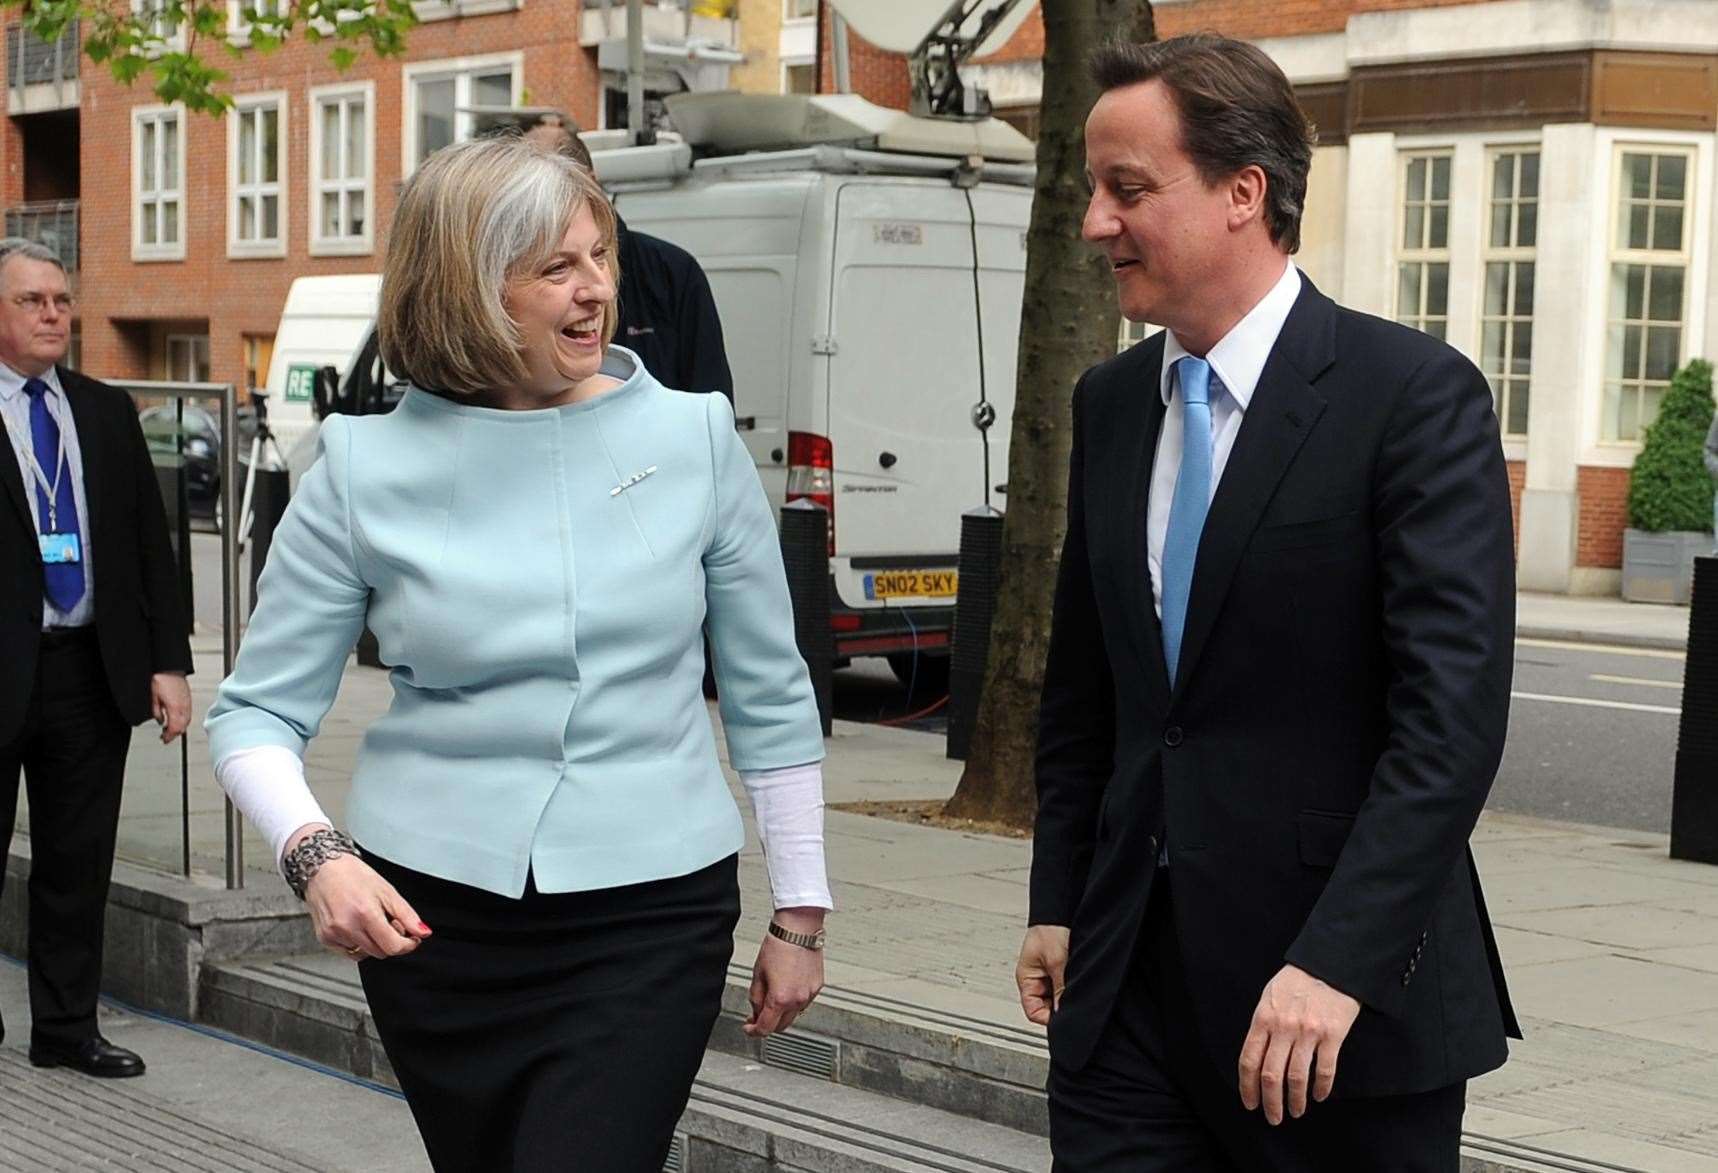 Home secretary Theresa May welcomes new prime minister David Cameron to the Home Office (Anthony Devlin/PA)